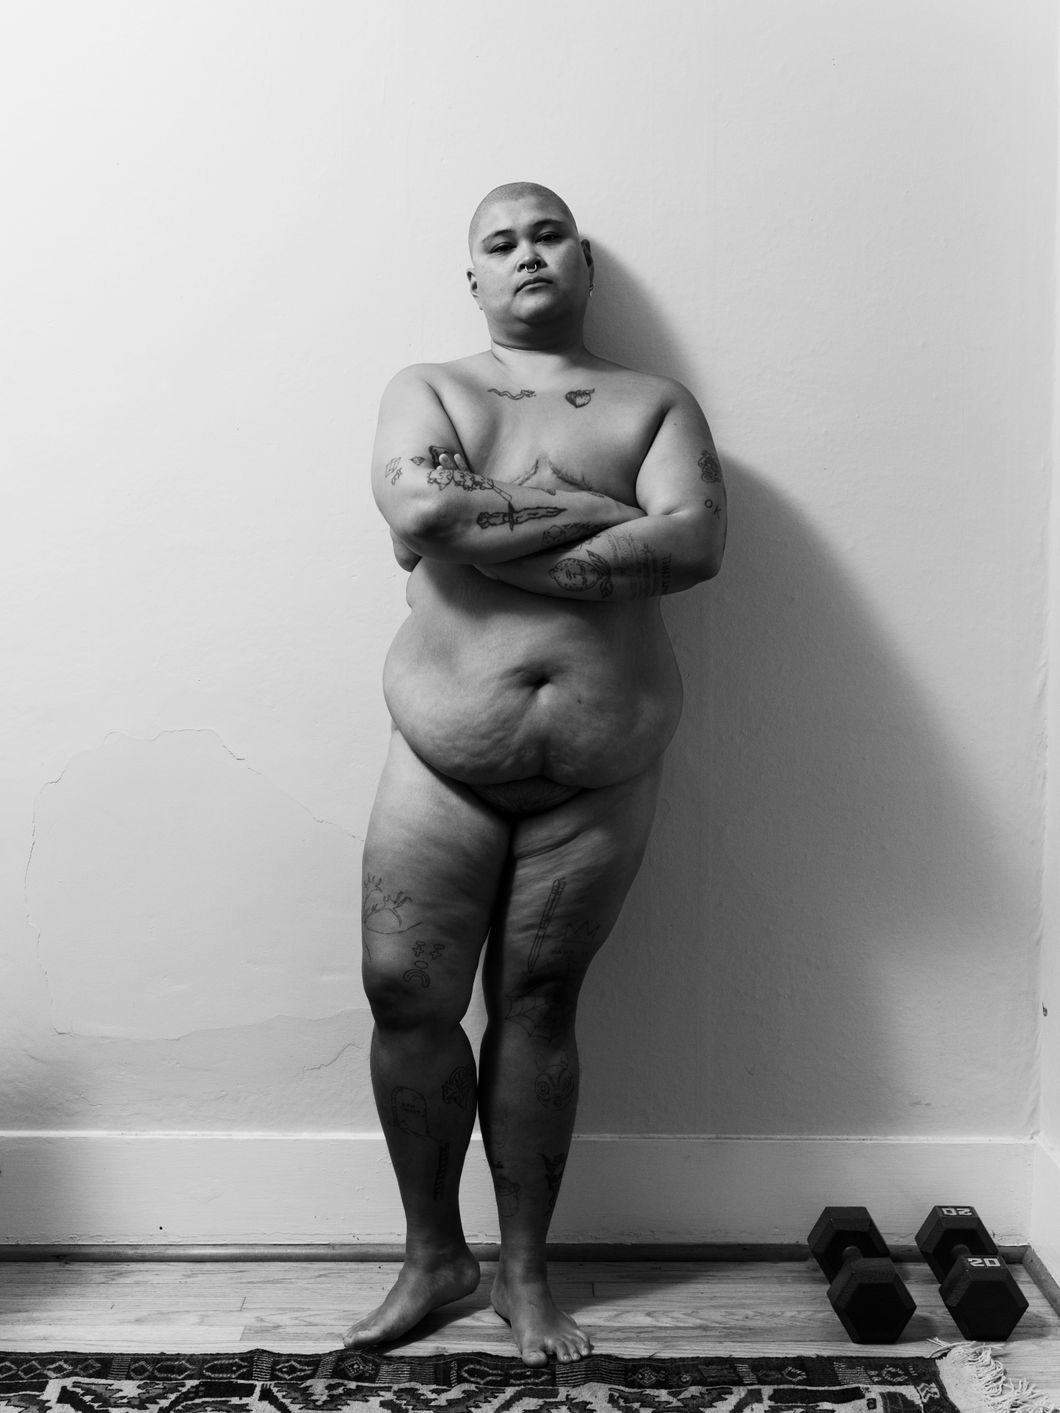 Black and white portrait of a nude person leaning against a wall. Two dumbbells lie on the floor besides them, next to a woven carpet. The person has a nose piercing, bald head and holds their tattooed arms crossed, looking strongly into the camera. © Ricardo Nagaoka